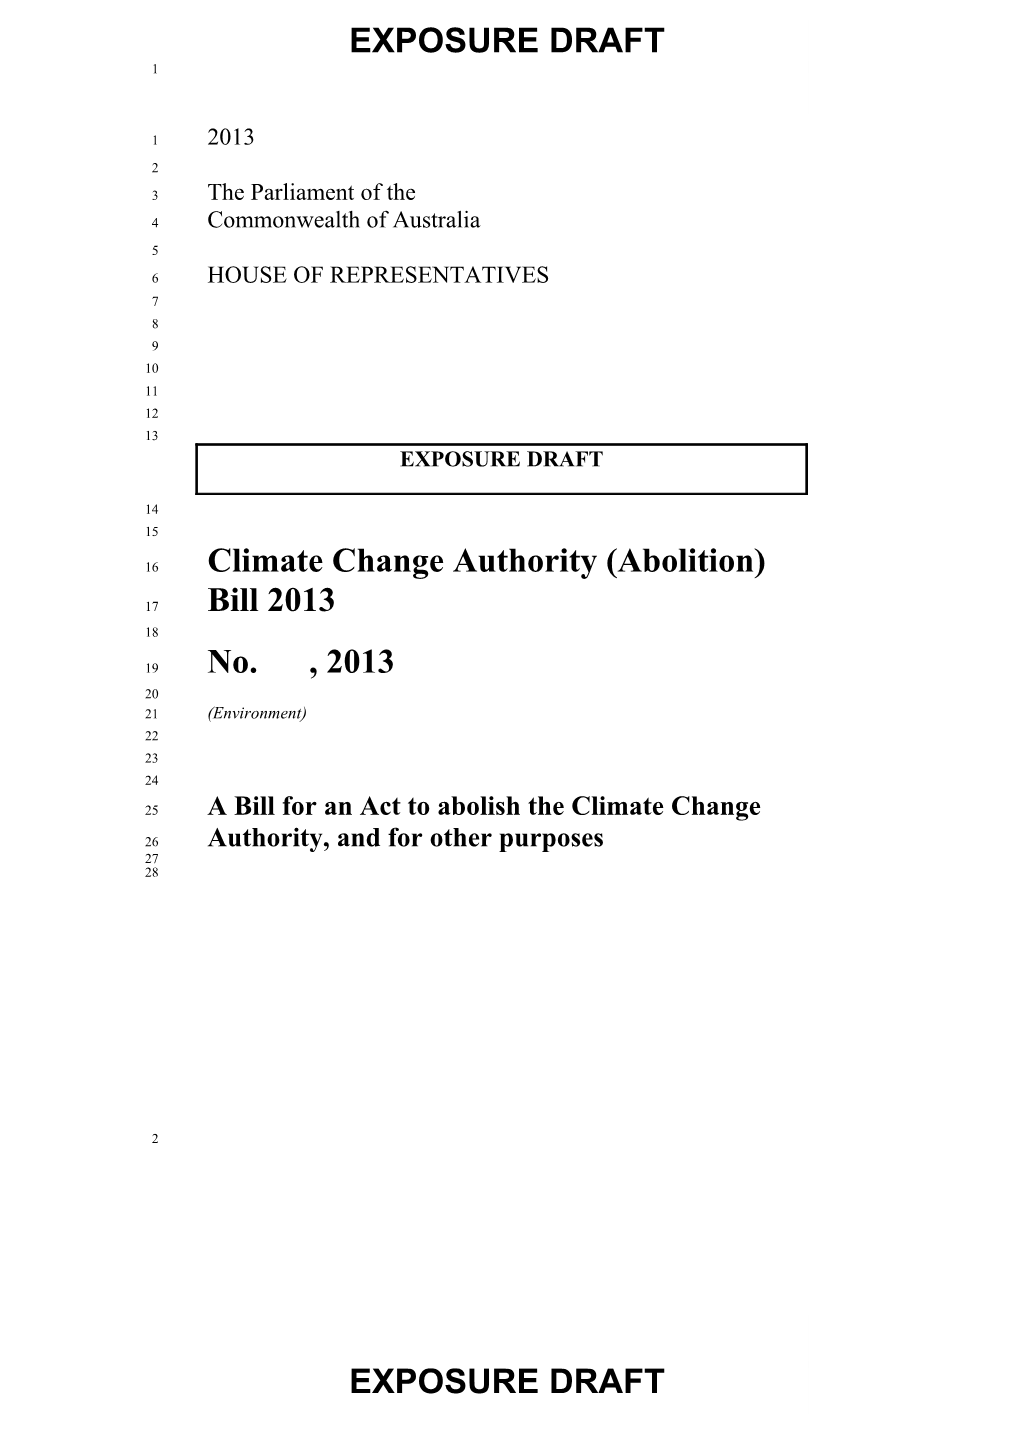 Climate Change Authority (Abolition) Bill 2013